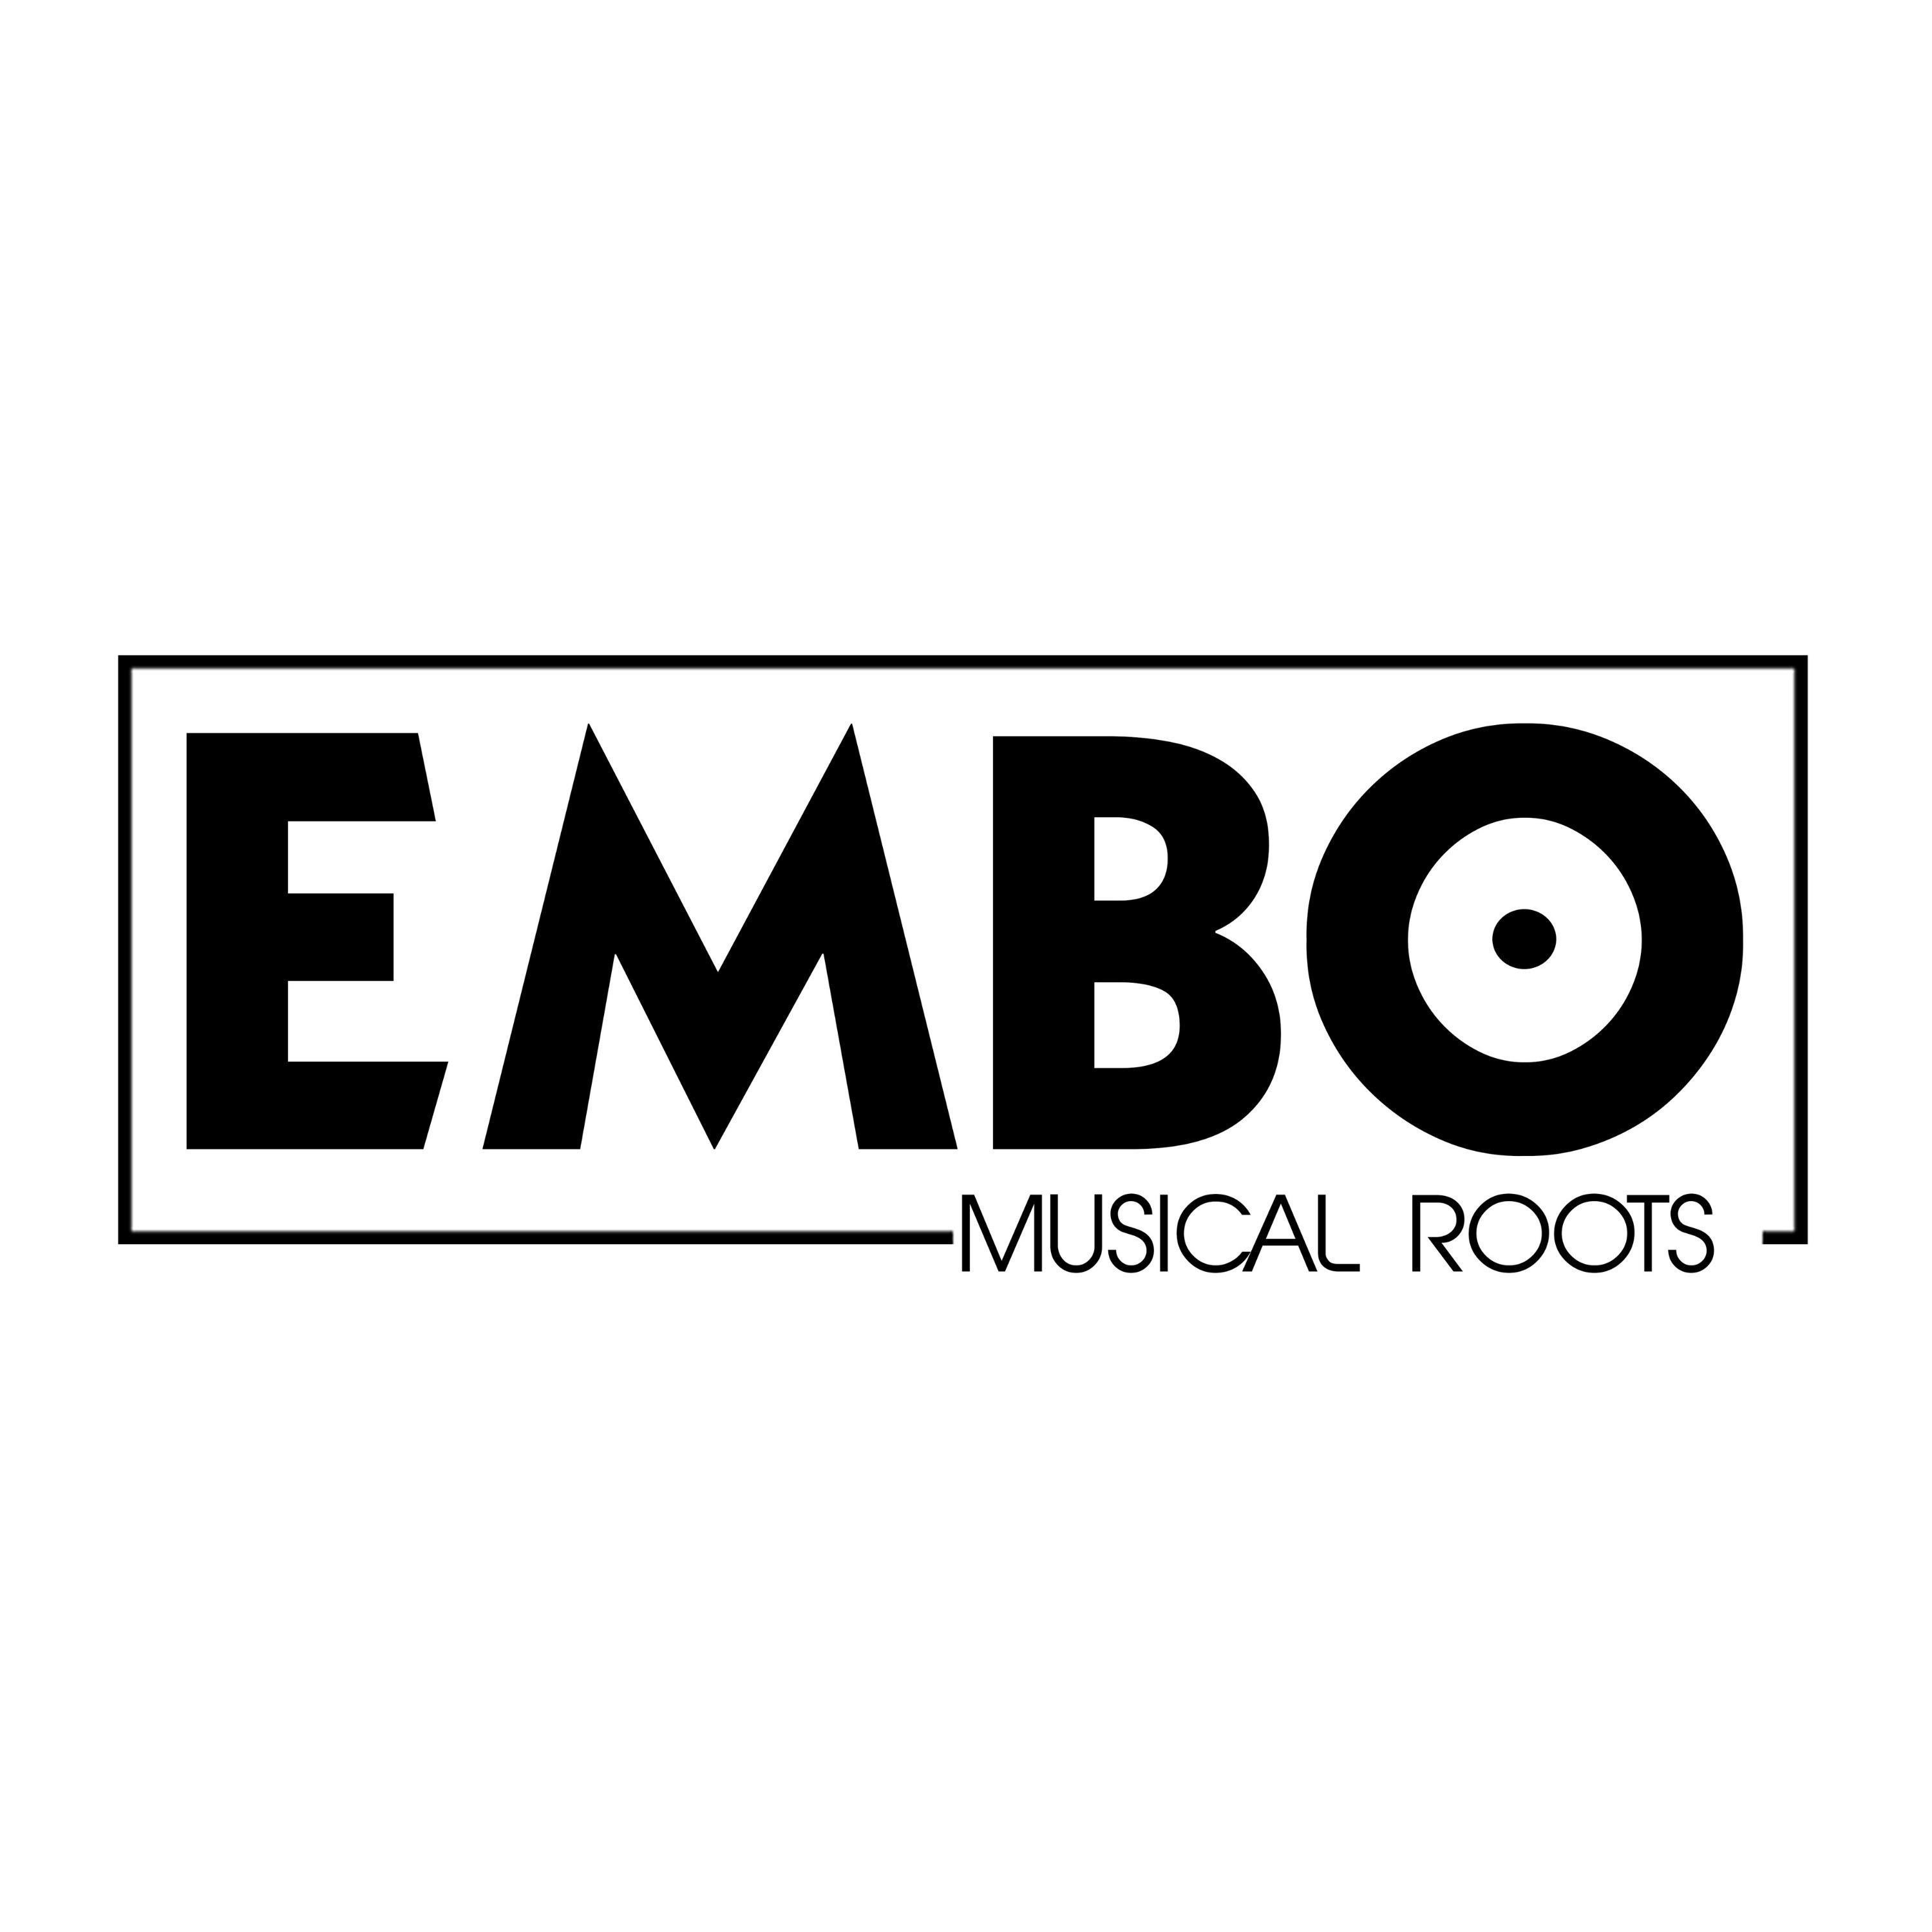 EMBO Musical Roots